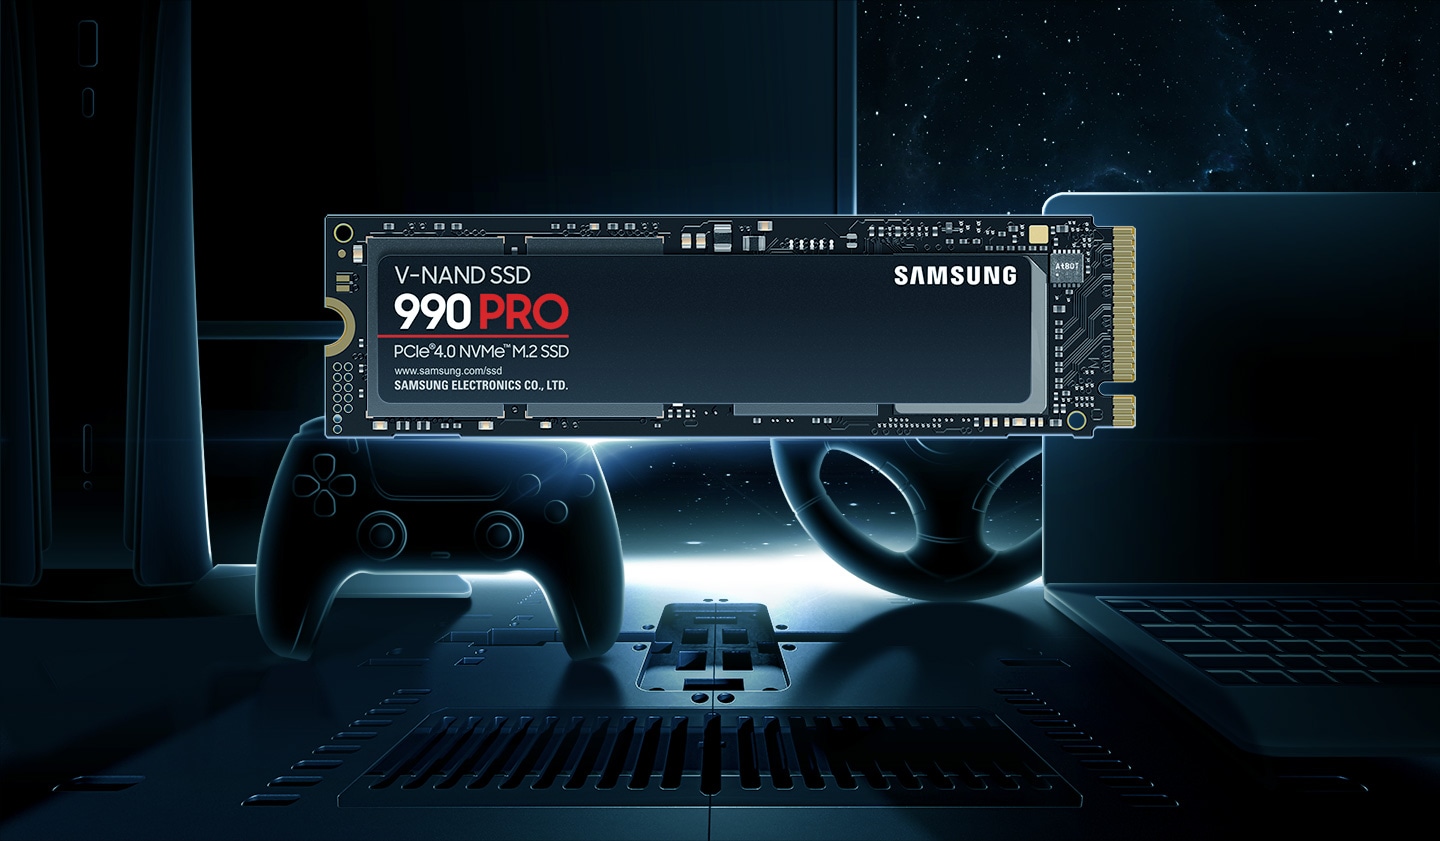 The 990 PRO can be installed on various consoles and gaming devices.